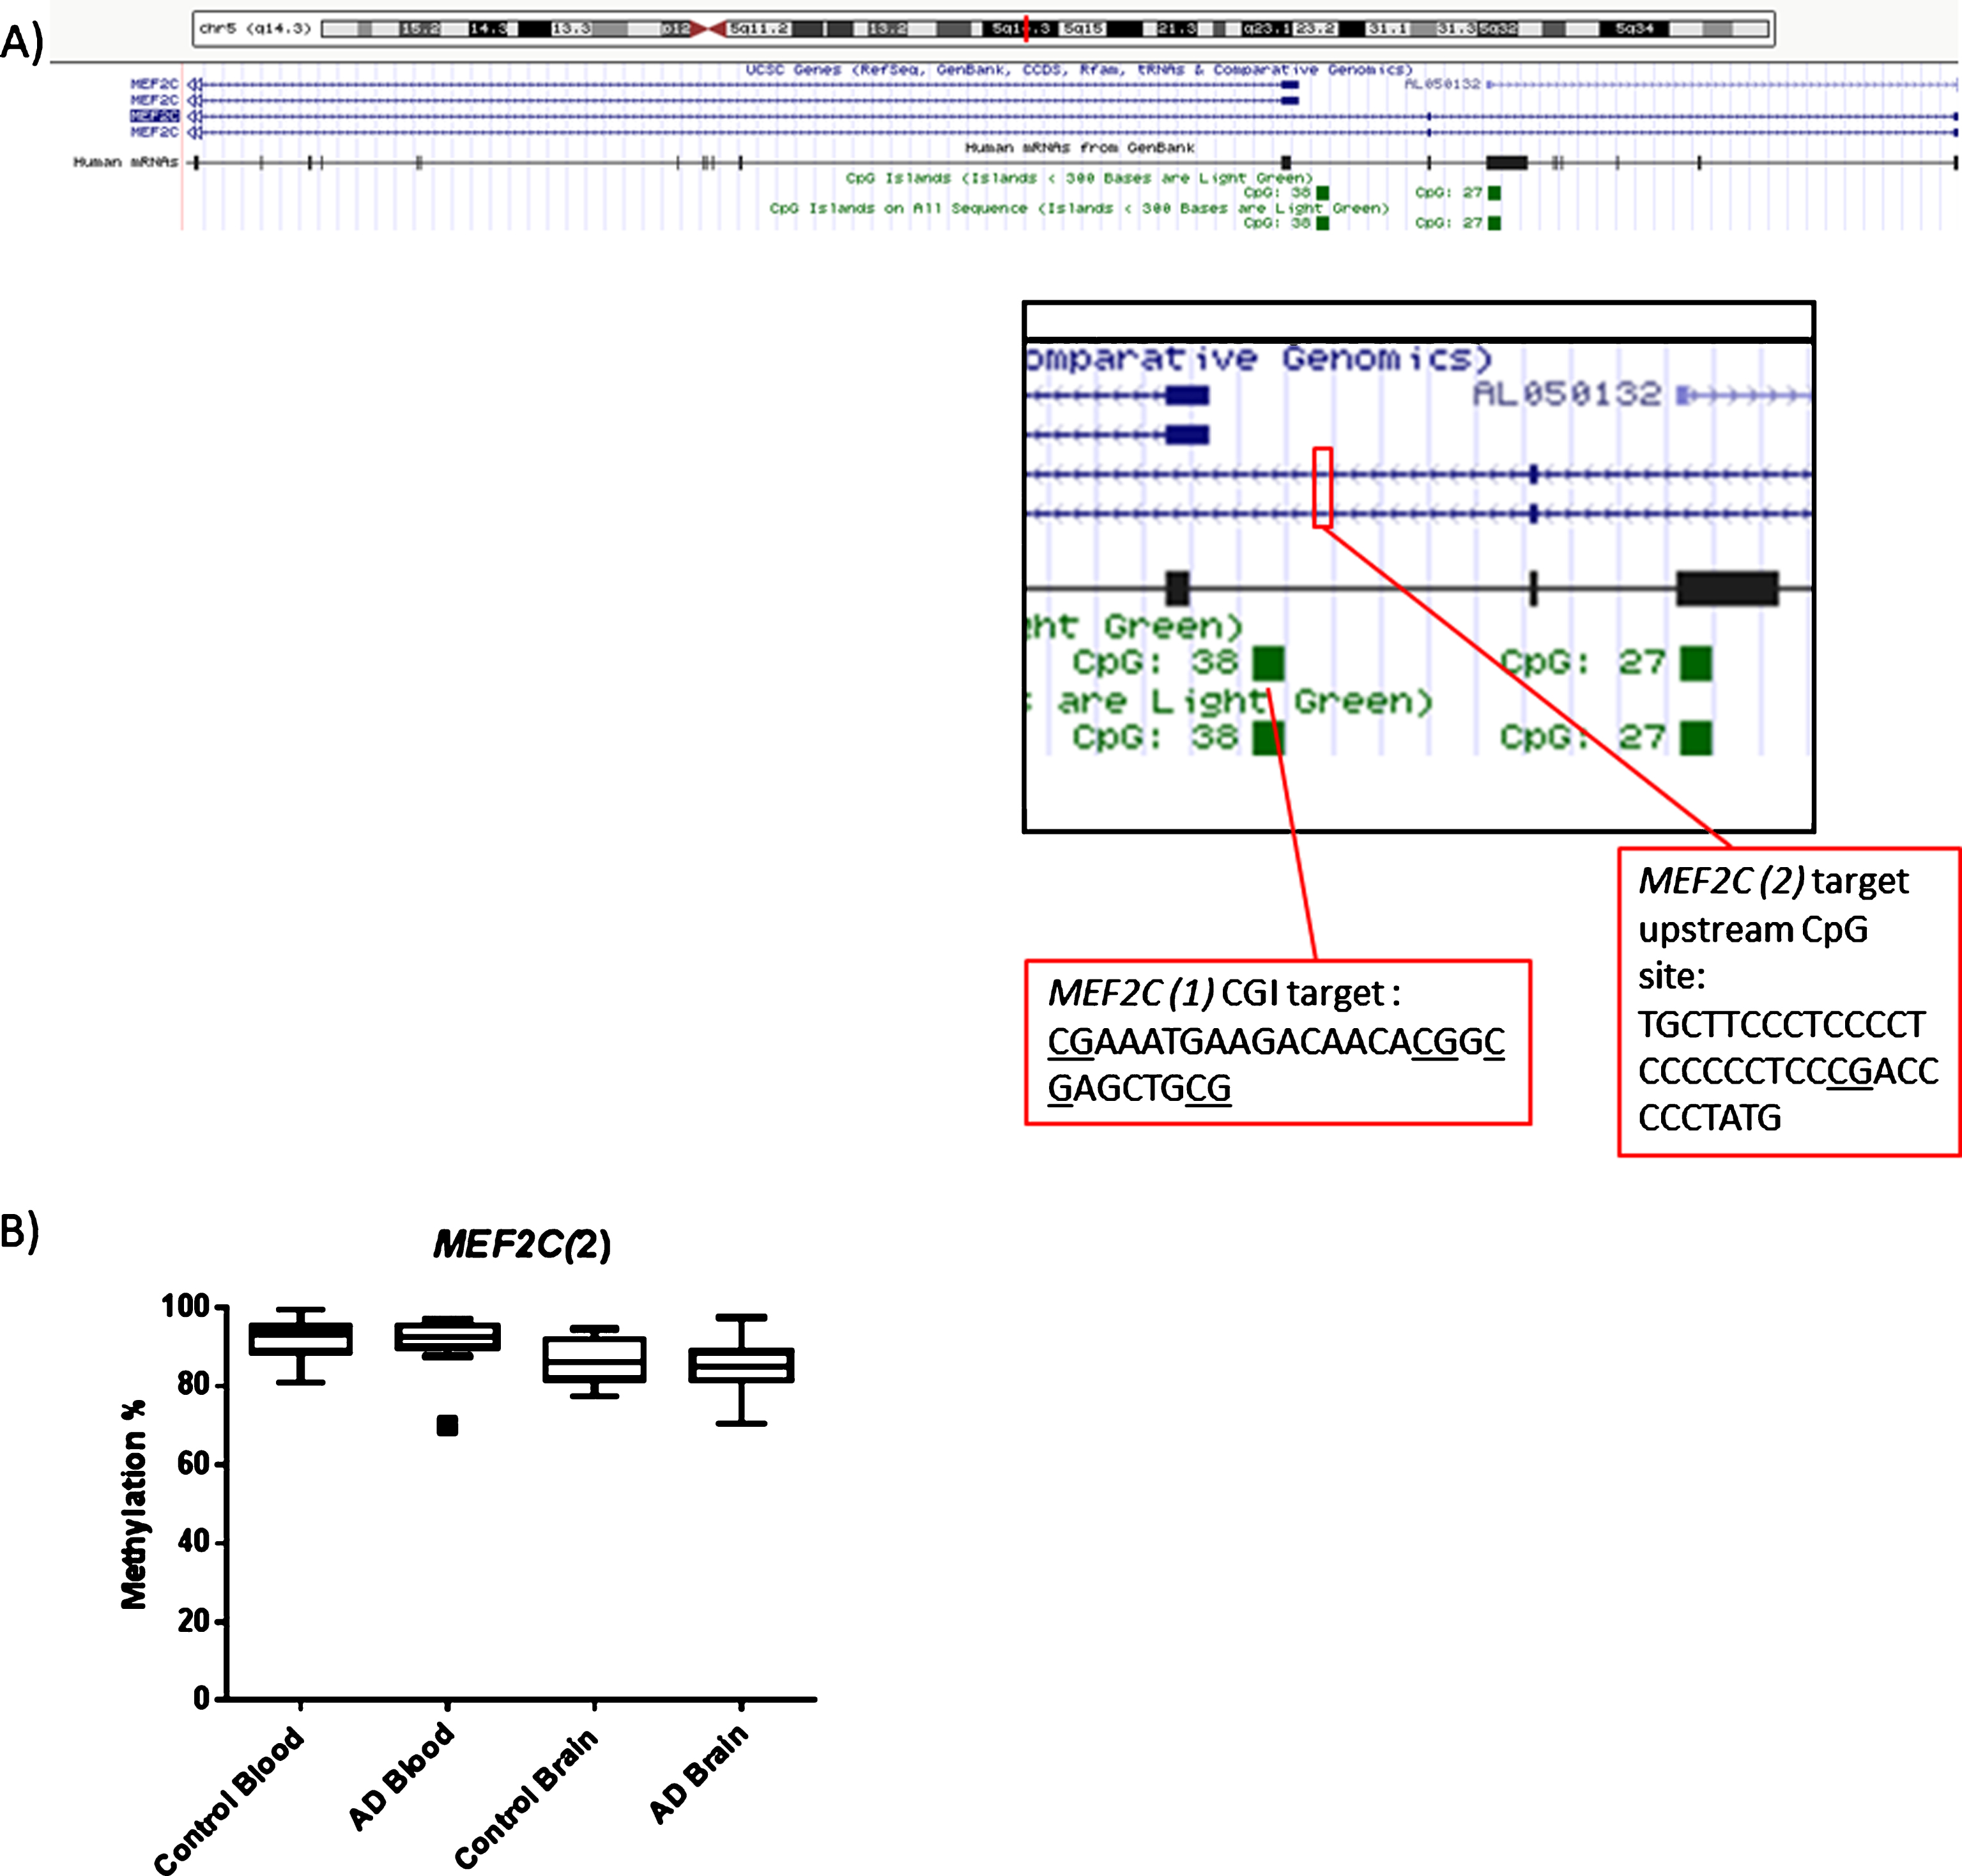 (A) Diagram showing the location of MEF2C(1) and MEF2C(2) targets within the MEF2C gene. (B) In terms of the second region of MEF2C investigated no obvious collective group wide differences between Control and AD at this CpG site were observed. Box plots shows median with 25th and 75th percentile as edges, the whiskers extend to the first quartile minus the interquatile range multiplied by 1.5 and up to the third quartile add the interquartile range time 1.5. Control blood n = 26, AD blood n = 25, Control brain n = 10, AD brain n = 14.